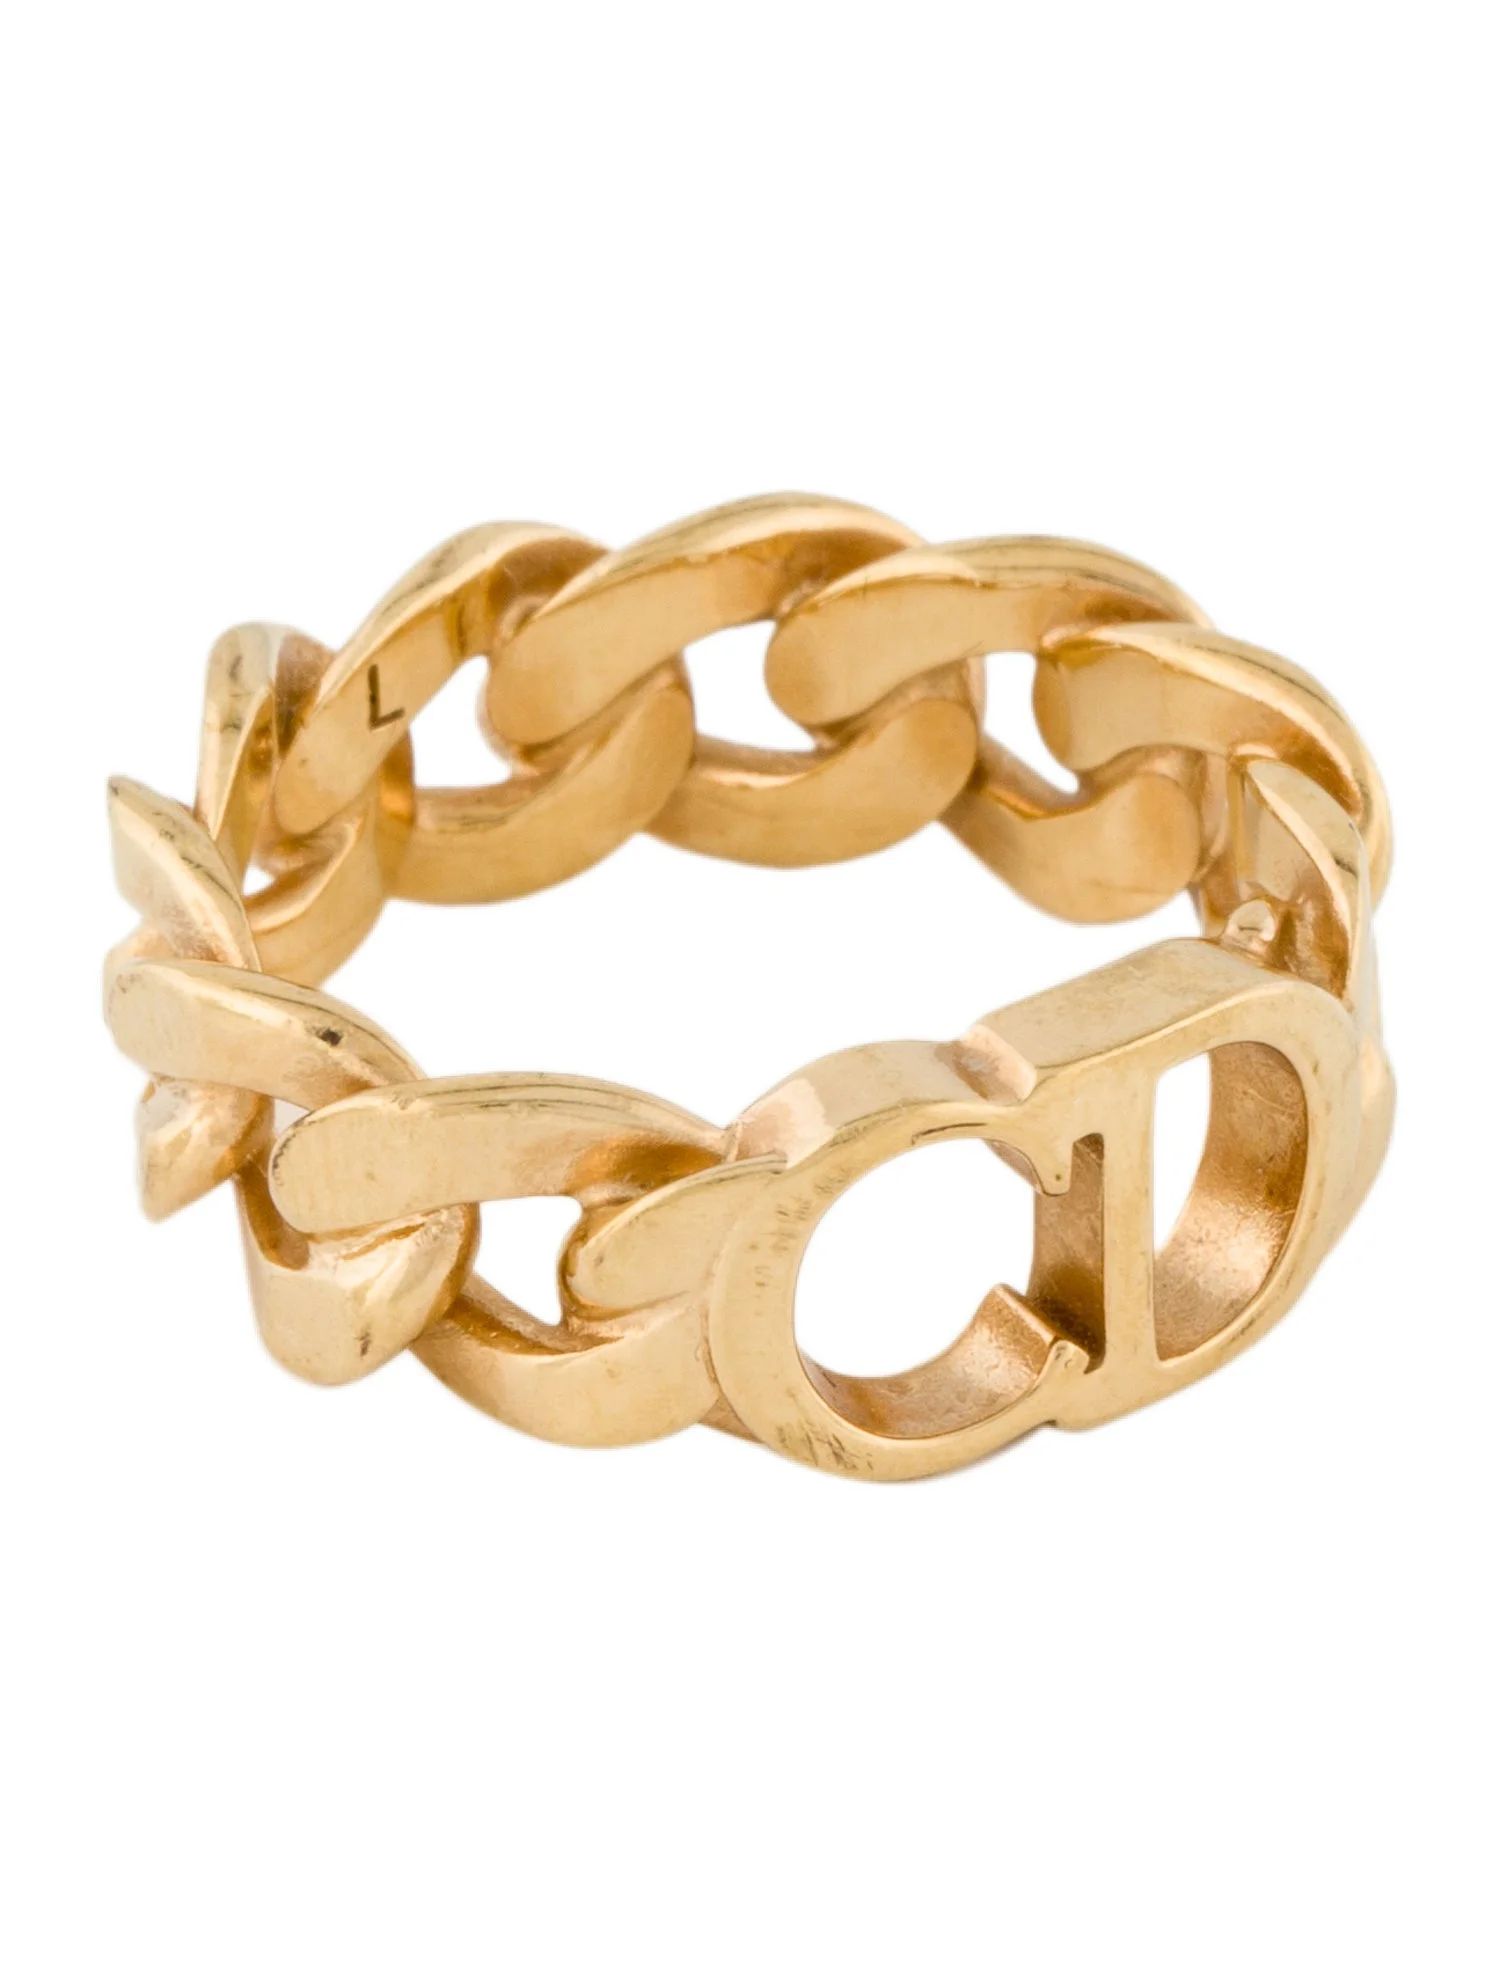 Danseuse Etoile Band Ring | The RealReal